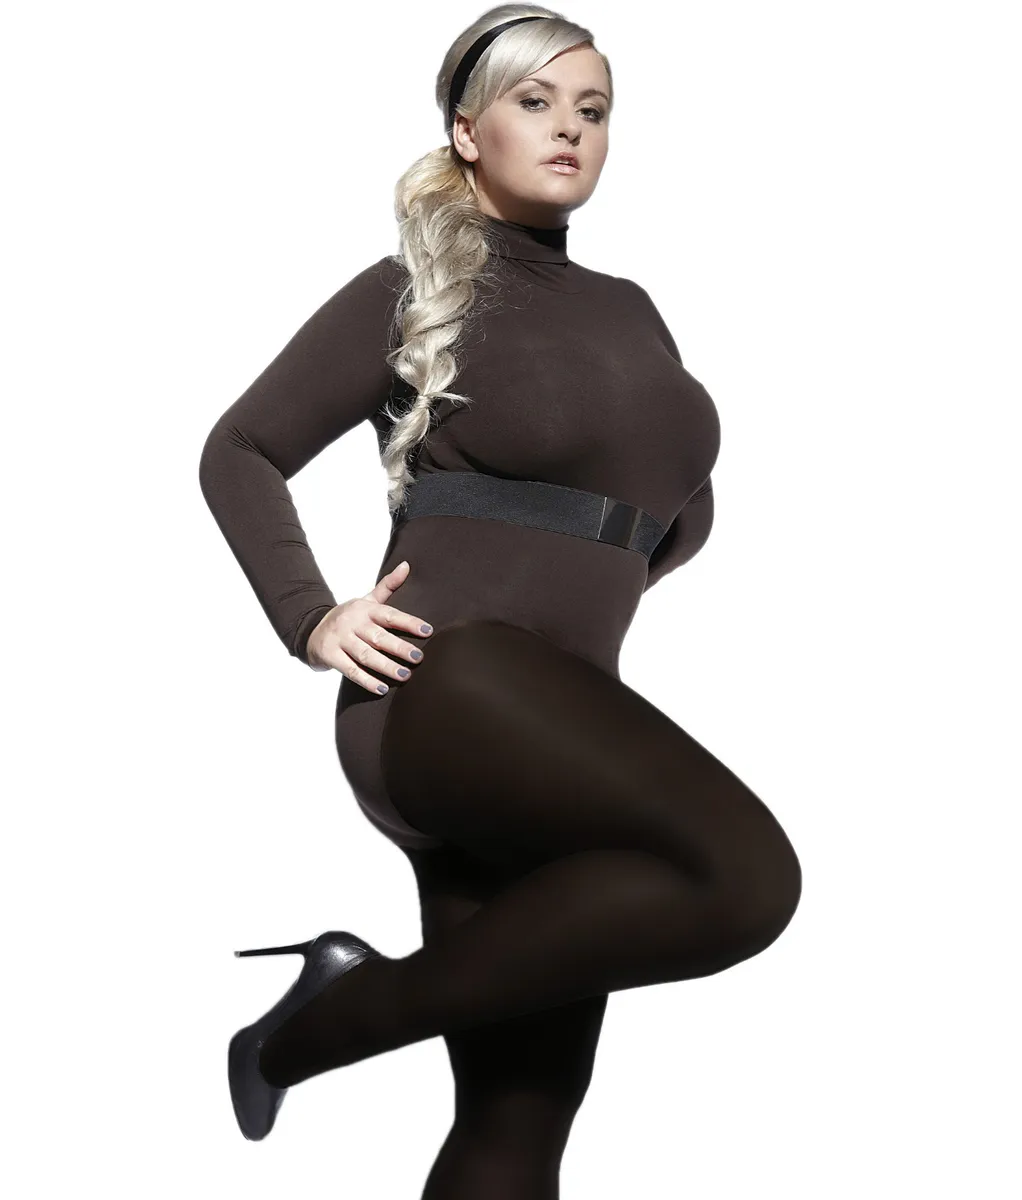 aaron straus recommends plus size pantyhose models pic